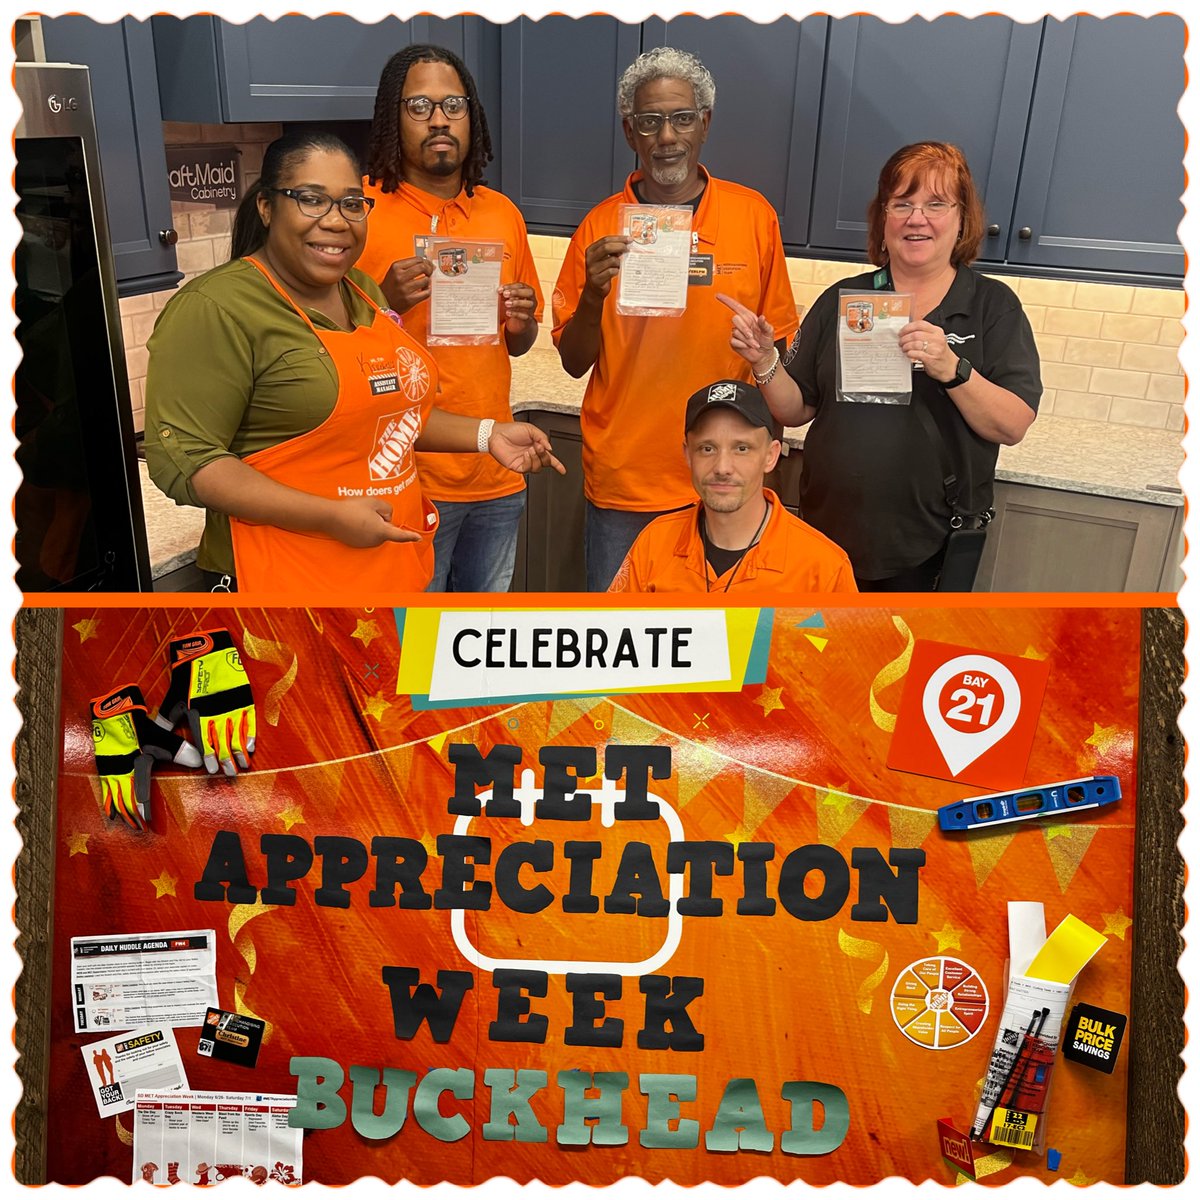 Day 1 Celebrating our Buckhead Mid-shift MET associates. Thank you for all your pack down and hard work in the aisles.@mlindsey1223 @MarkCoxHD @mr_richardson @philp_scott @EllinProds @EileenClaar1